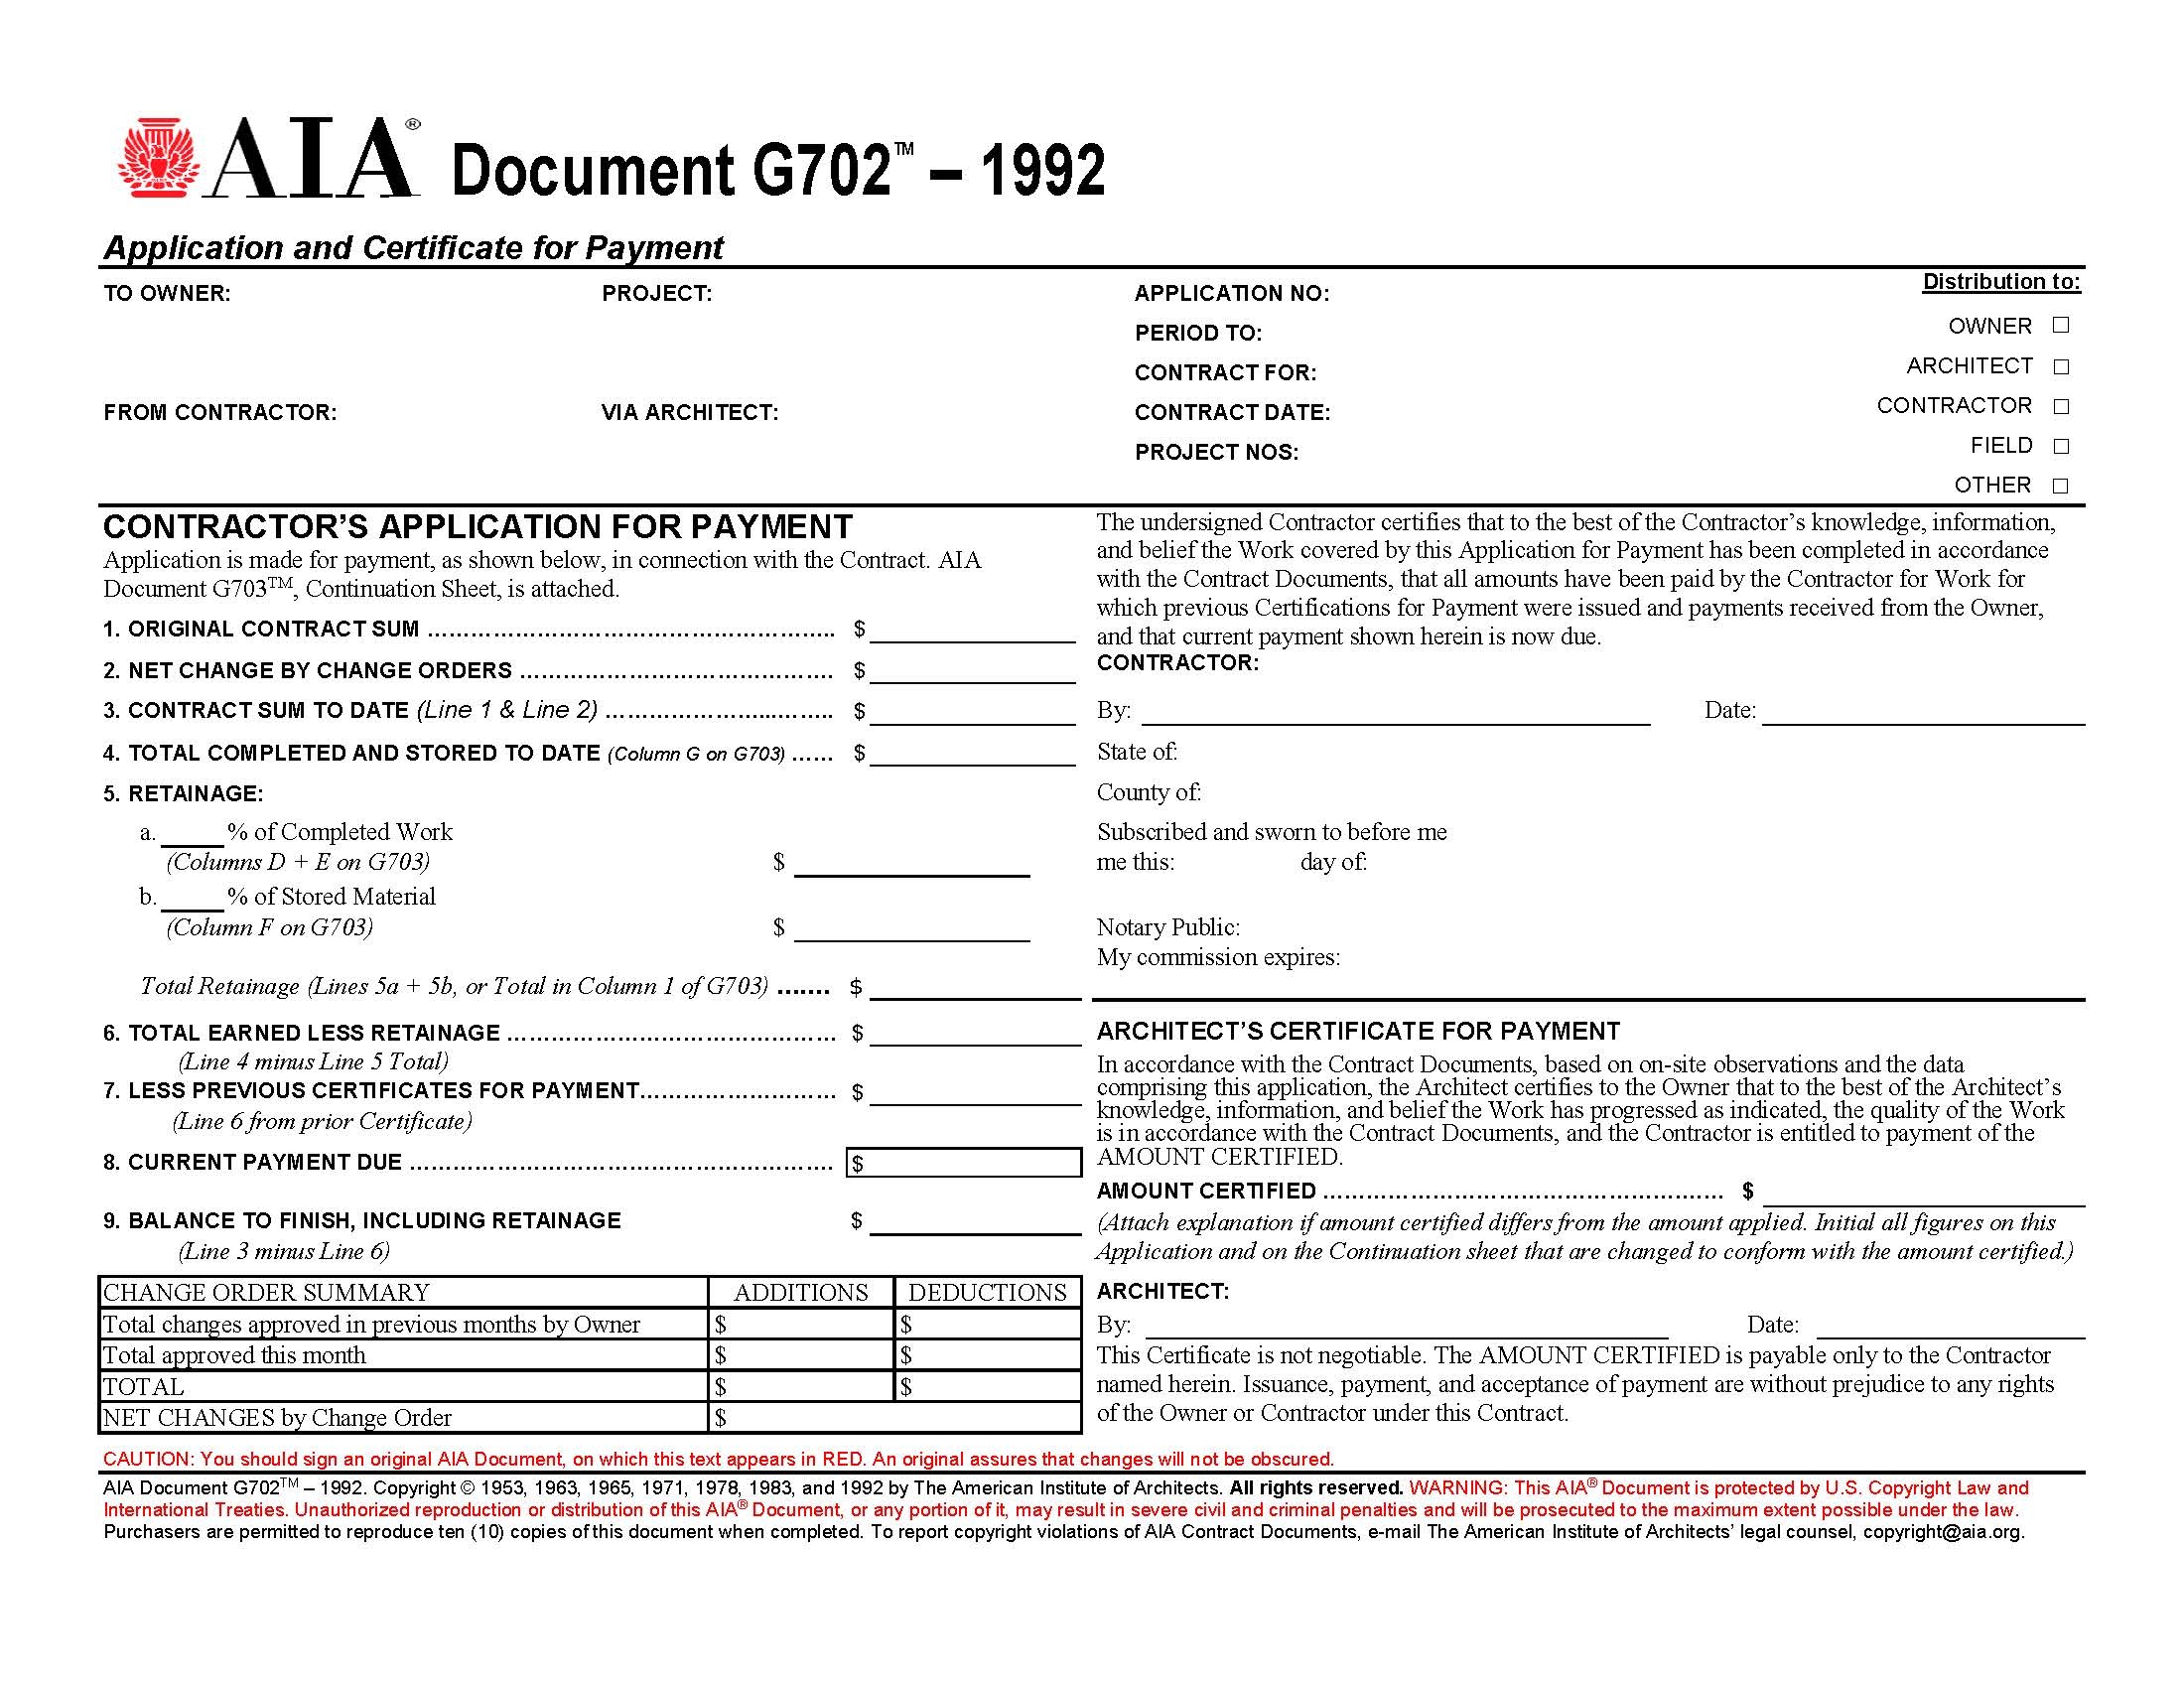 aia forms g702 g703 application certificate and continuation aia g702 excelformat printable